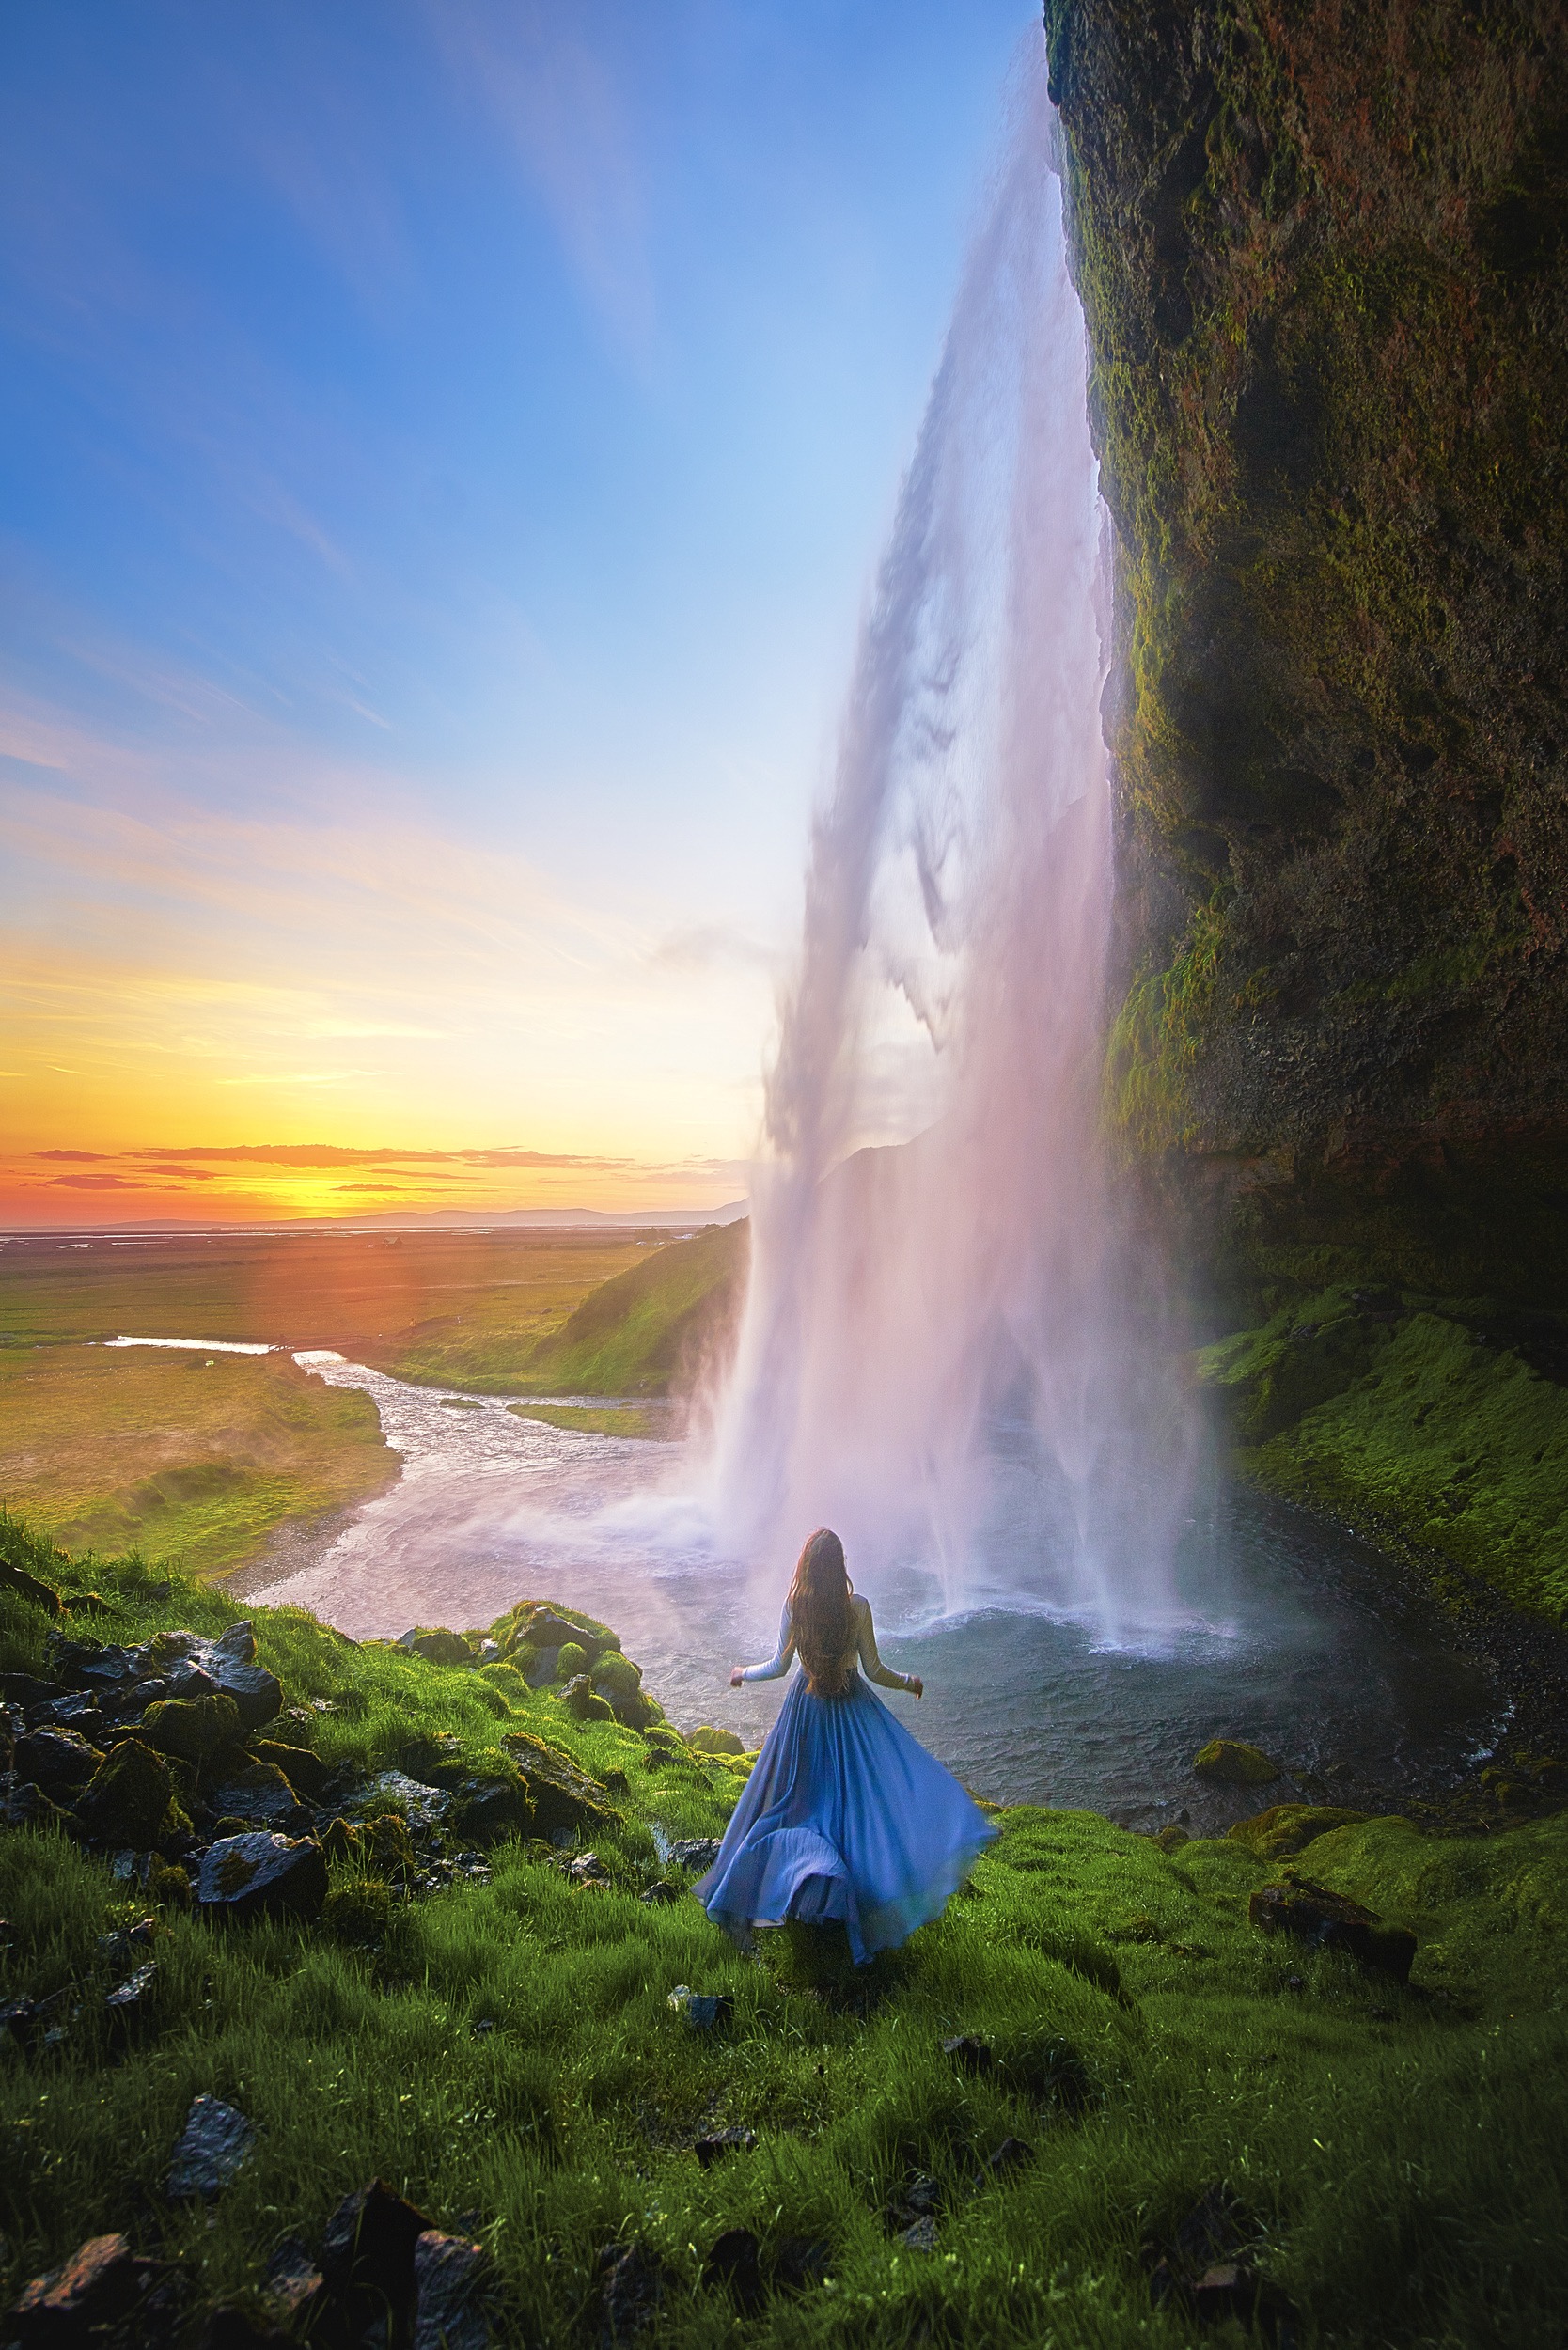 A woman in a blue skirt with long hair standing in the grass behind the Seljalandsfoss waterfall.